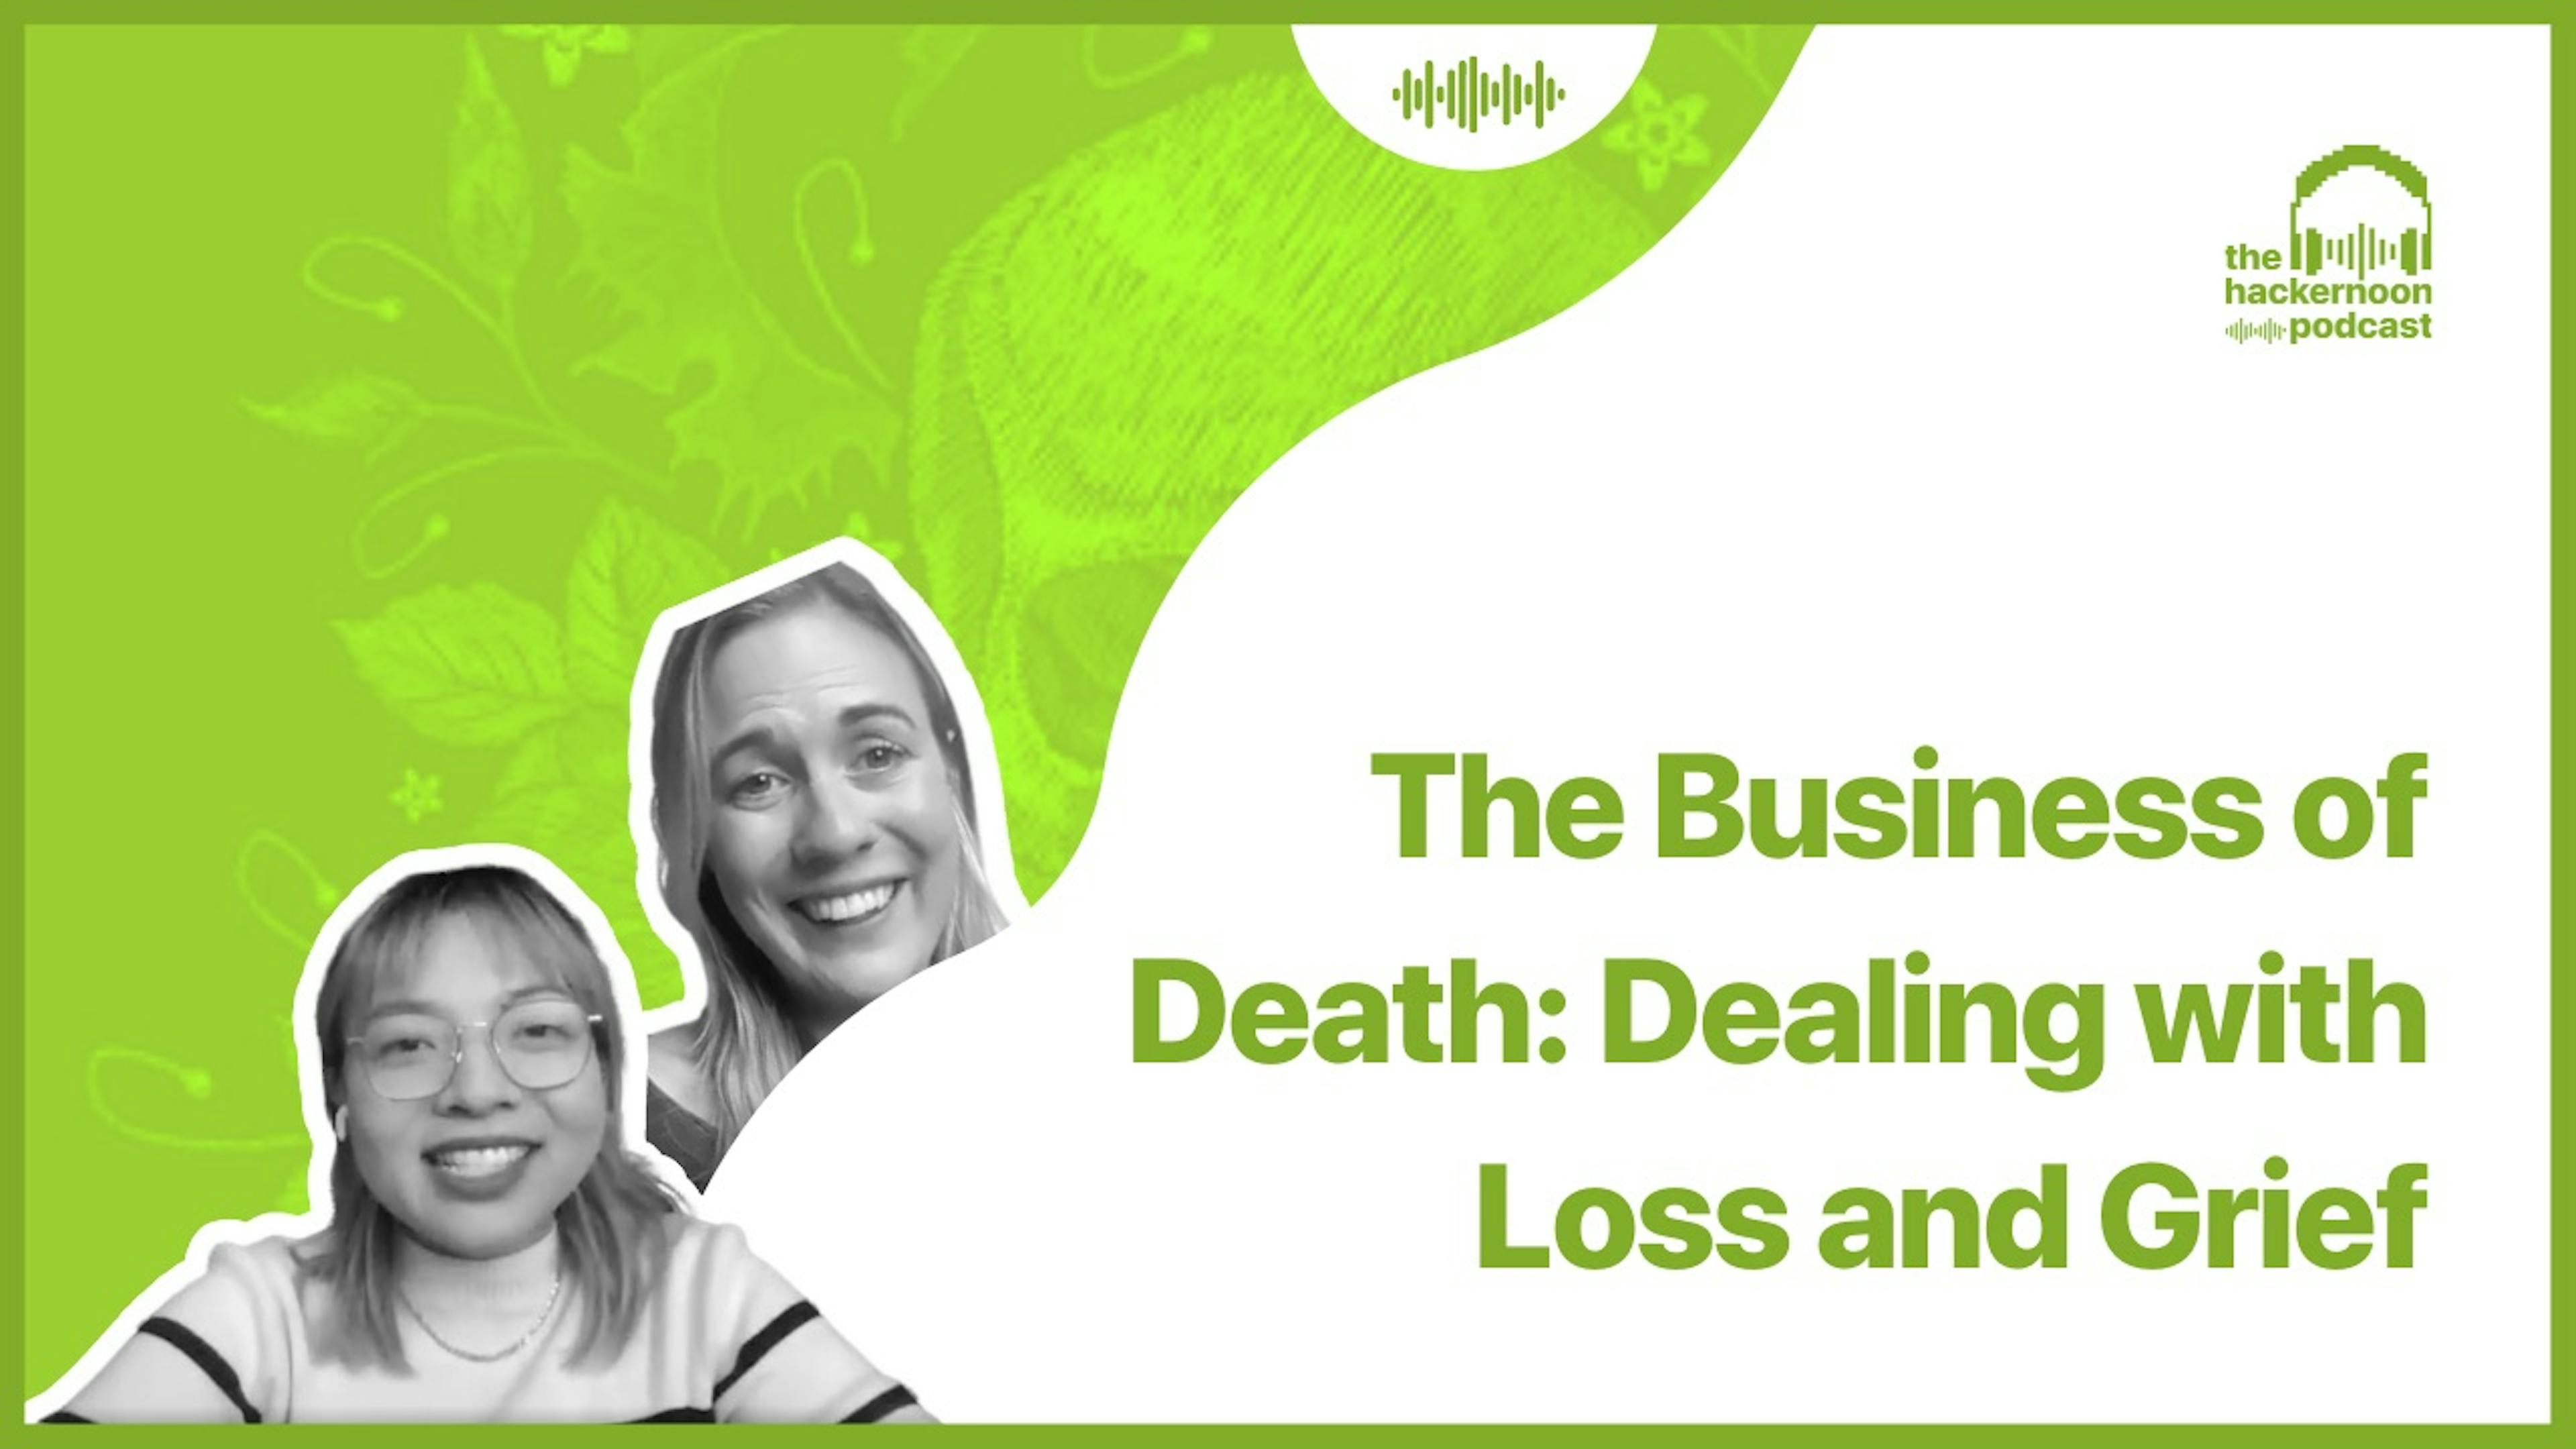 featured image - The Business of Death: Dealing with Loss and Grief